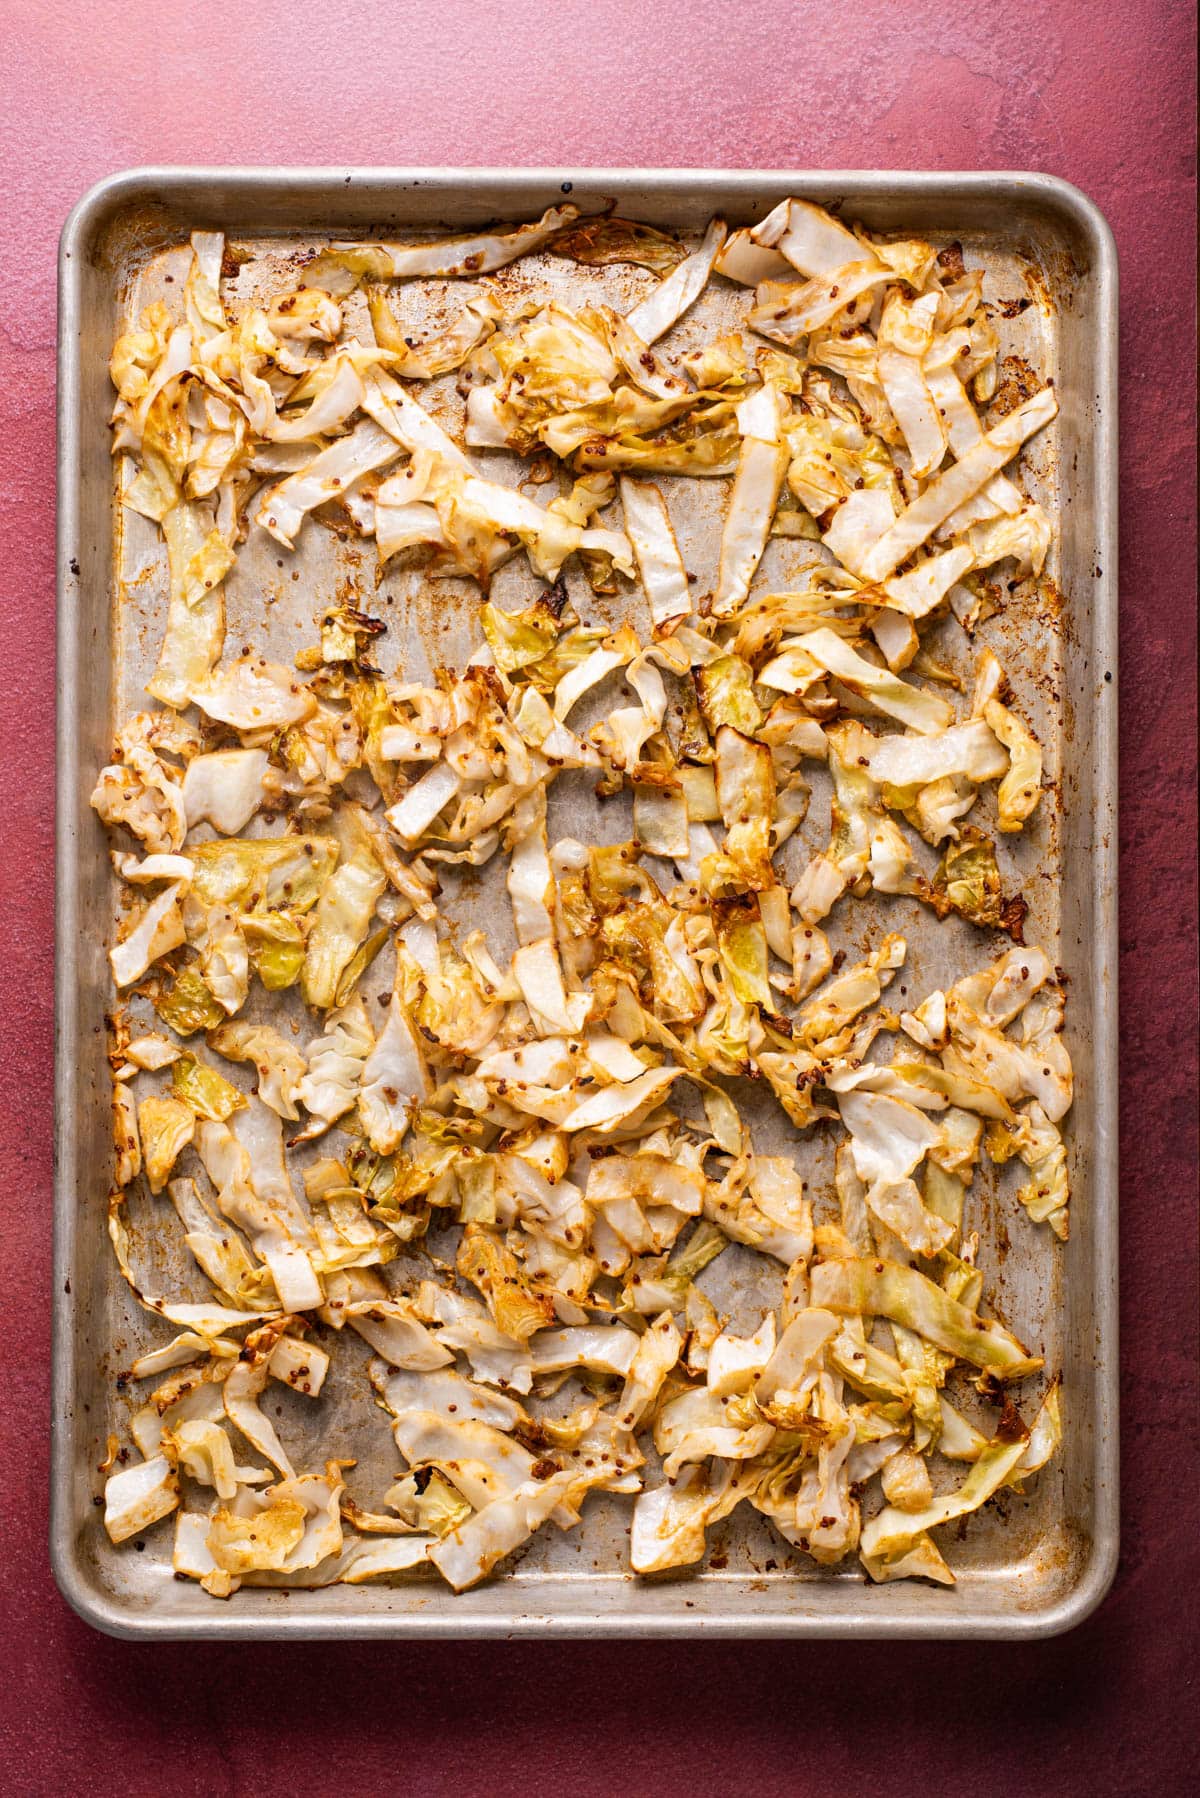 Miso-balsamic sliced roasted cabbage on a baking sheet.